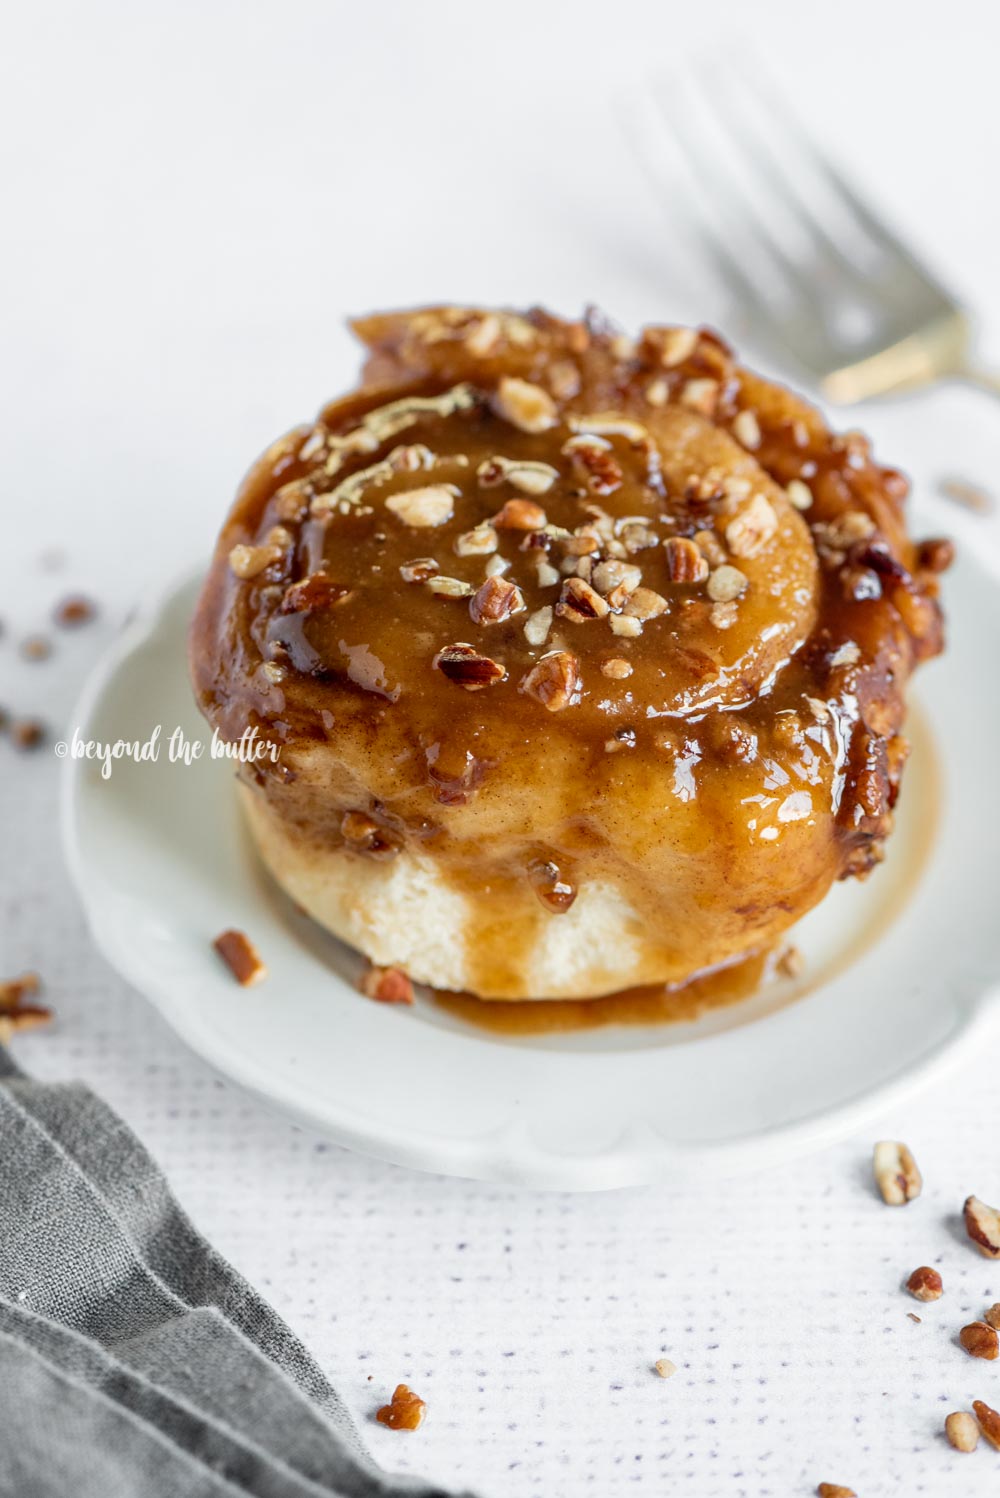 Easy Homemade Sticky Buns from Scratch recipe | All Images © Beyond the Butter, LLC